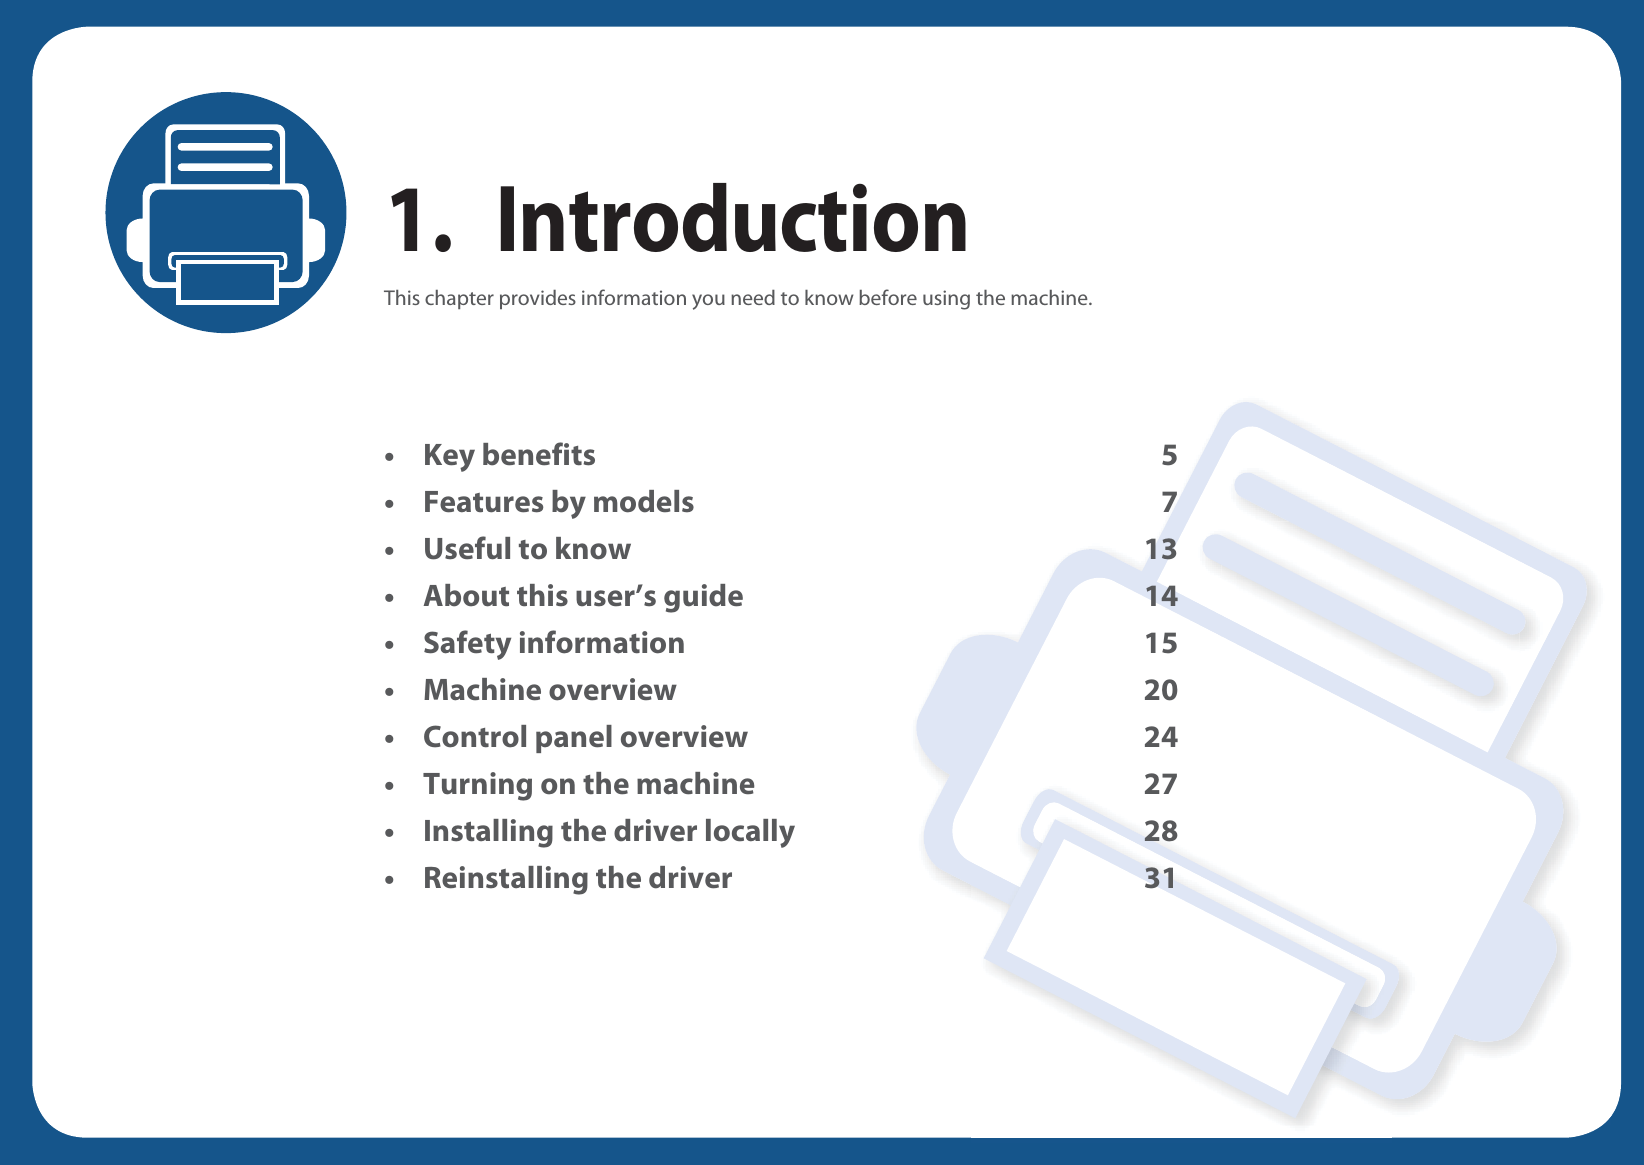 1. IntroductionThis chapter provides information you need to know before using the machine.•Key benefits 5• Features by models 7• Useful to know 13• About this user’s guide 14• Safety information 15• Machine overview 20• Control panel overview 24• Turning on the machine 27• Installing the driver locally 28• Reinstalling the driver 31